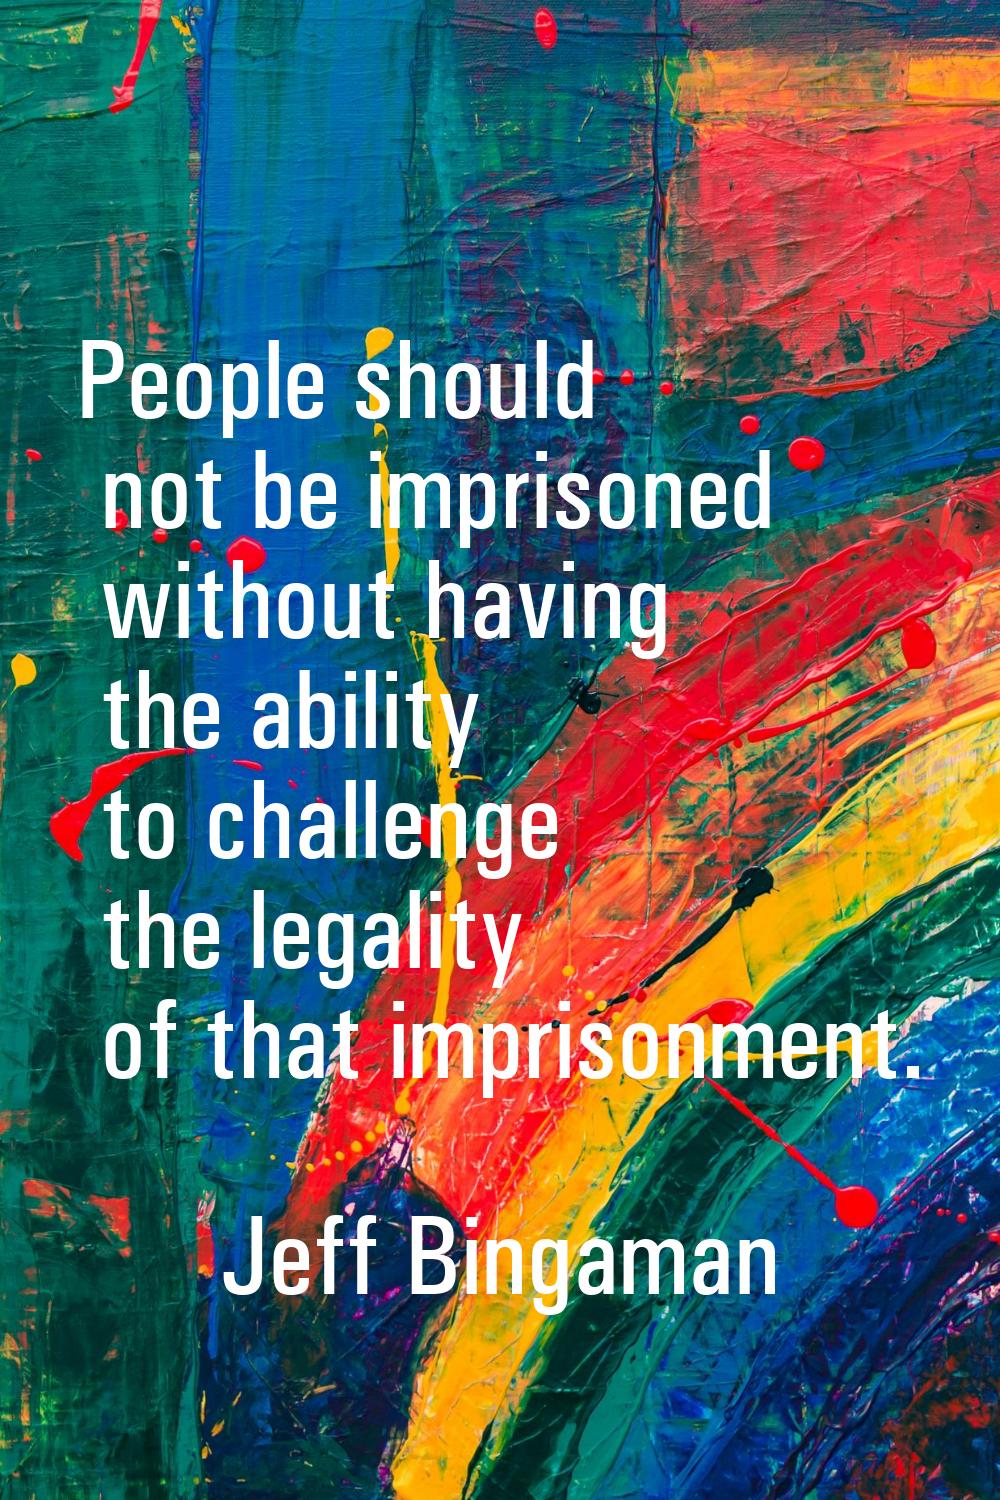 People should not be imprisoned without having the ability to challenge the legality of that impris